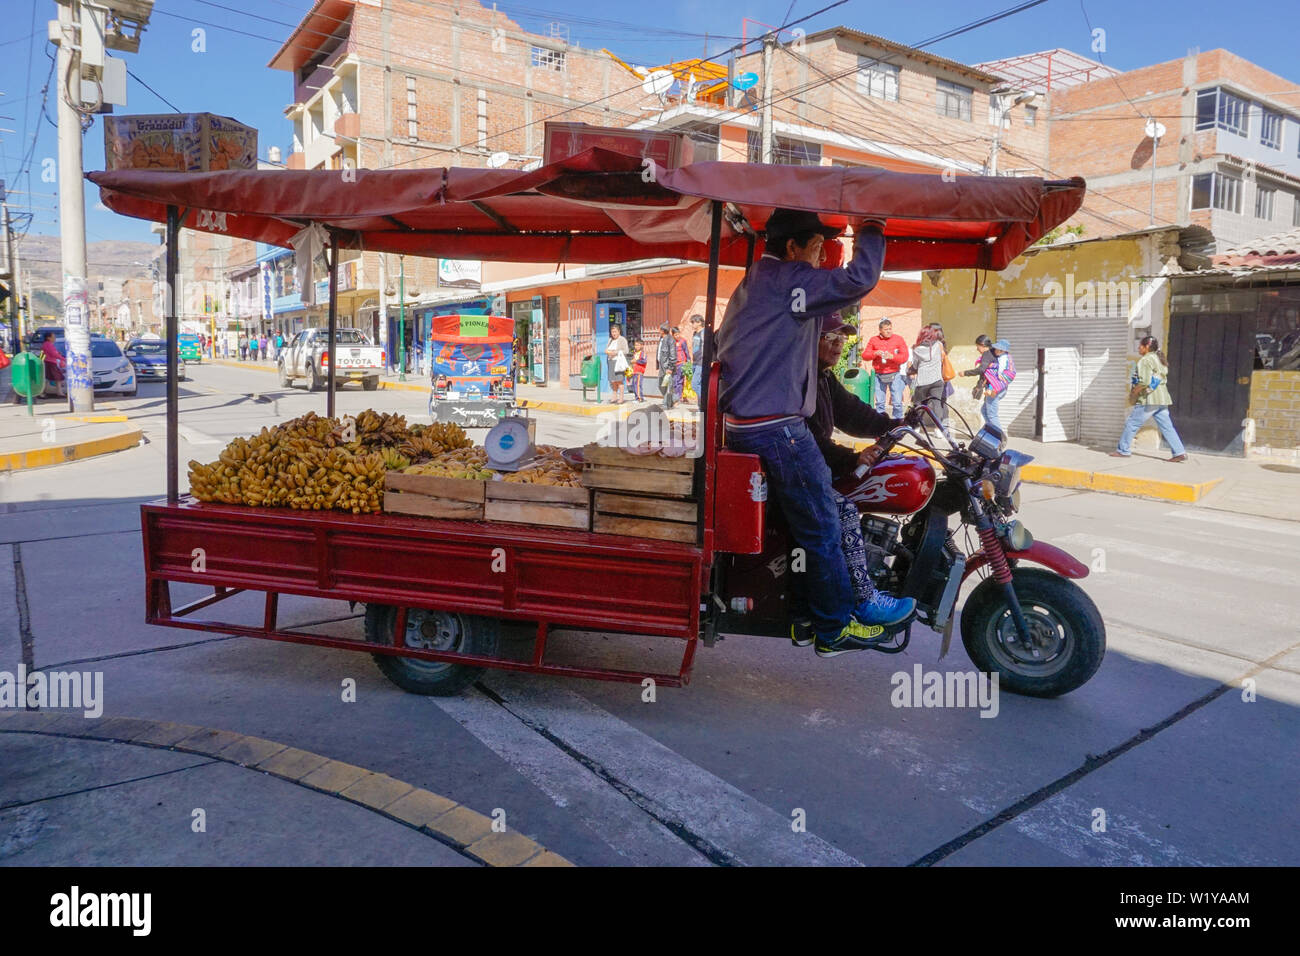 Huaraz, Ancash / Peru: 4. June 2016: farmer and merchant driving their motorcycle and stall to sell their corn at the market in Huaraz Stock Photo